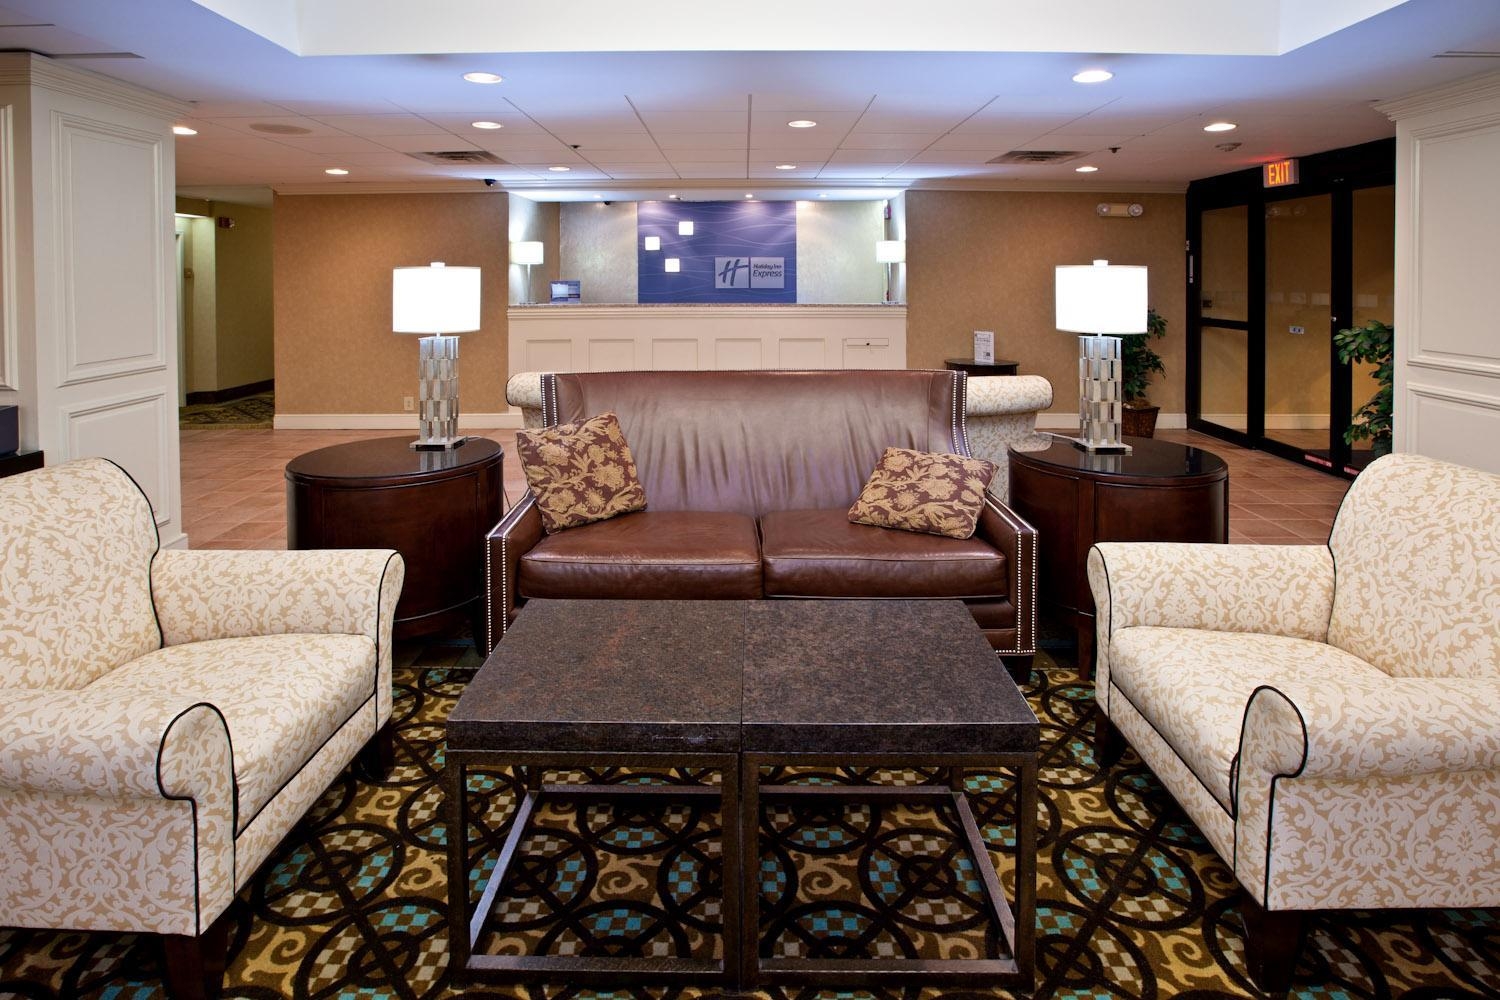 Holiday Inn Express INDIANAPOLIS AIRPORT (Plainfield)